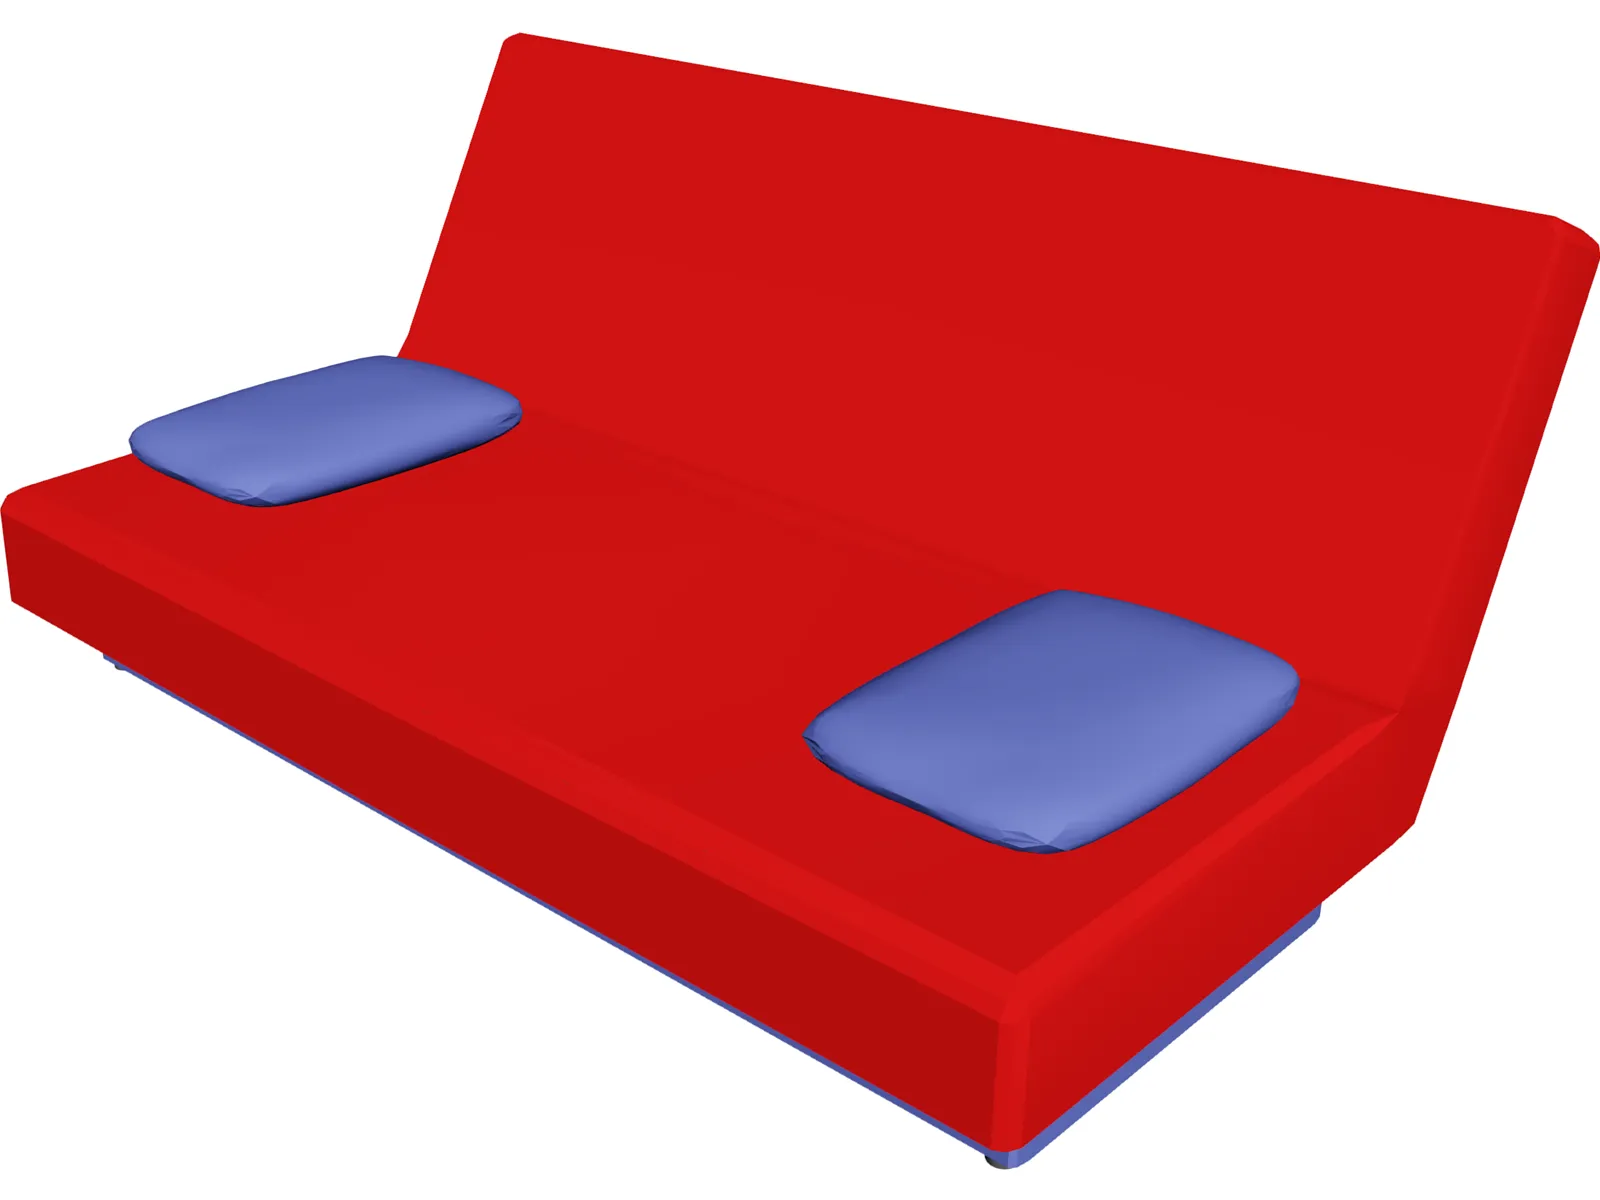 Sofa with Two Pillows 3D Model